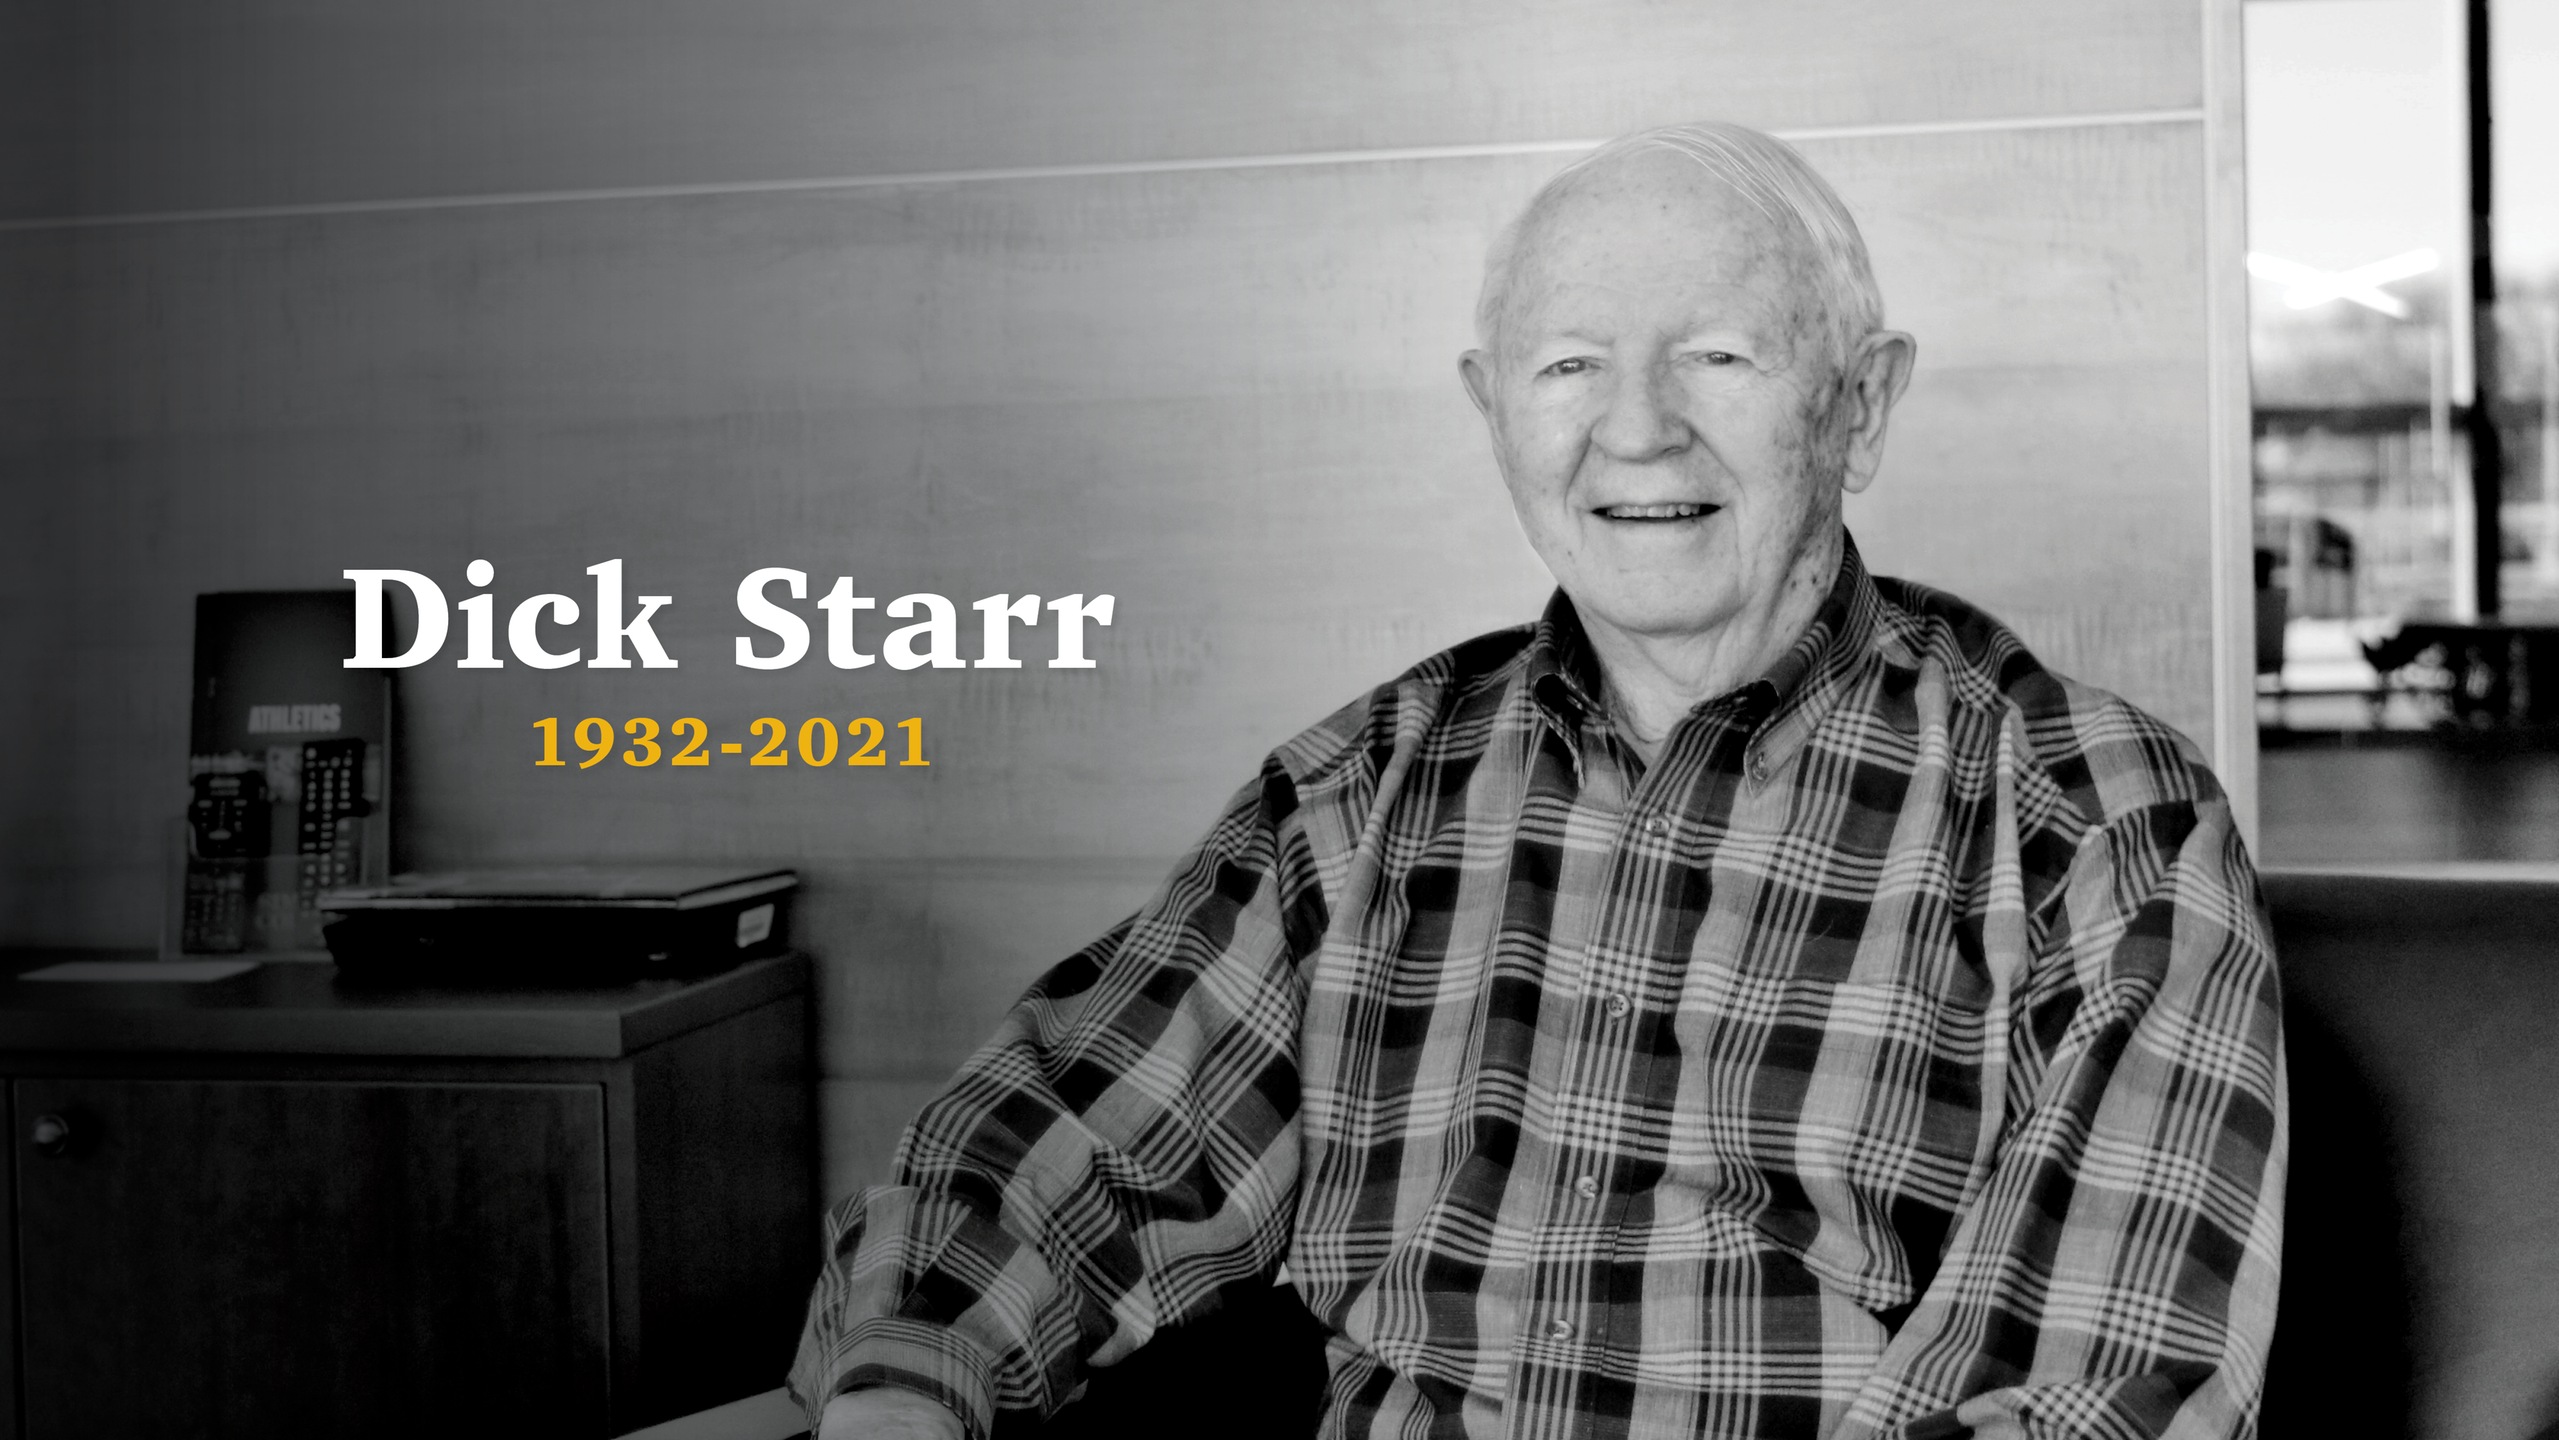 Picture of Simpson College Hall of Fame basketball and tennis coach Dick Starr, who died May 23, 2021 at age 88.